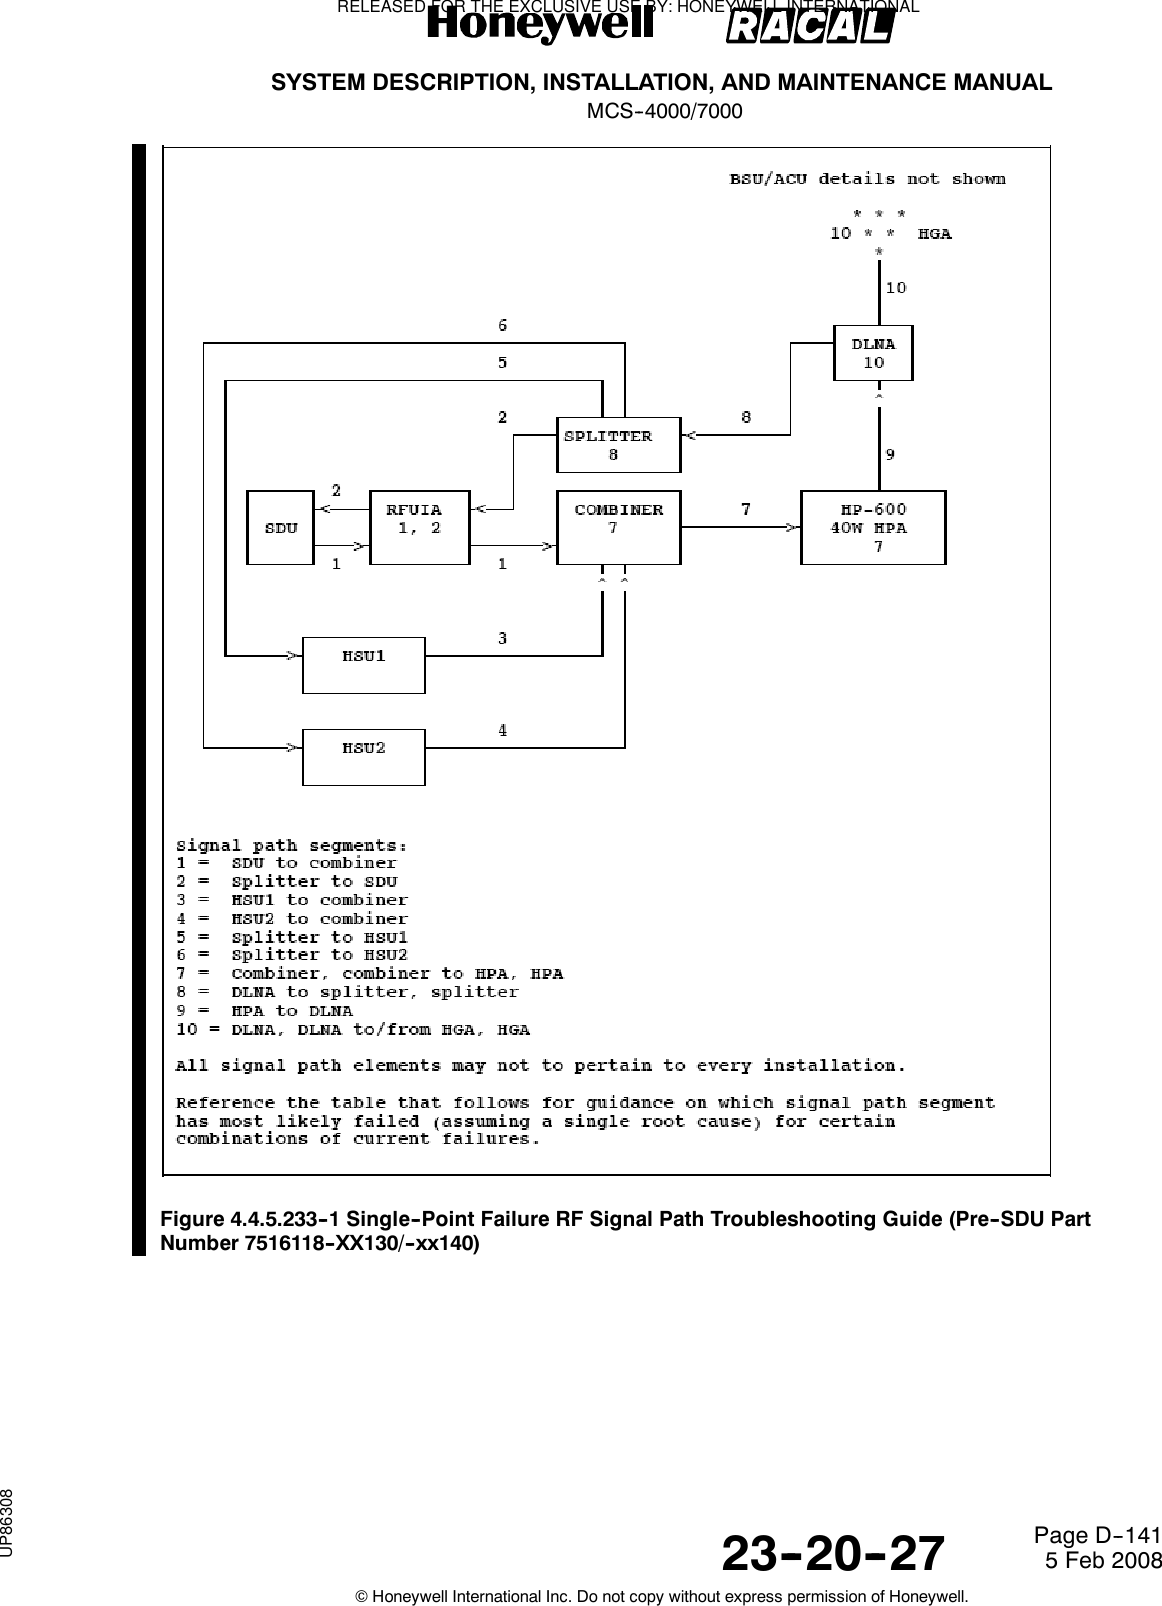 SYSTEM DESCRIPTION, INSTALLATION, AND MAINTENANCE MANUALMCS--4000/700023--20--27 5 Feb 2008©Honeywell International Inc. Do not copy without express permission of Honeywell.Page D--141Figure 4.4.5.233--1 Single--Point Failure RF Signal Path Troubleshooting Guide (Pre--SDU PartNumber 7516118--XX130/--xx140)RELEASED FOR THE EXCLUSIVE USE BY: HONEYWELL INTERNATIONALUP86308